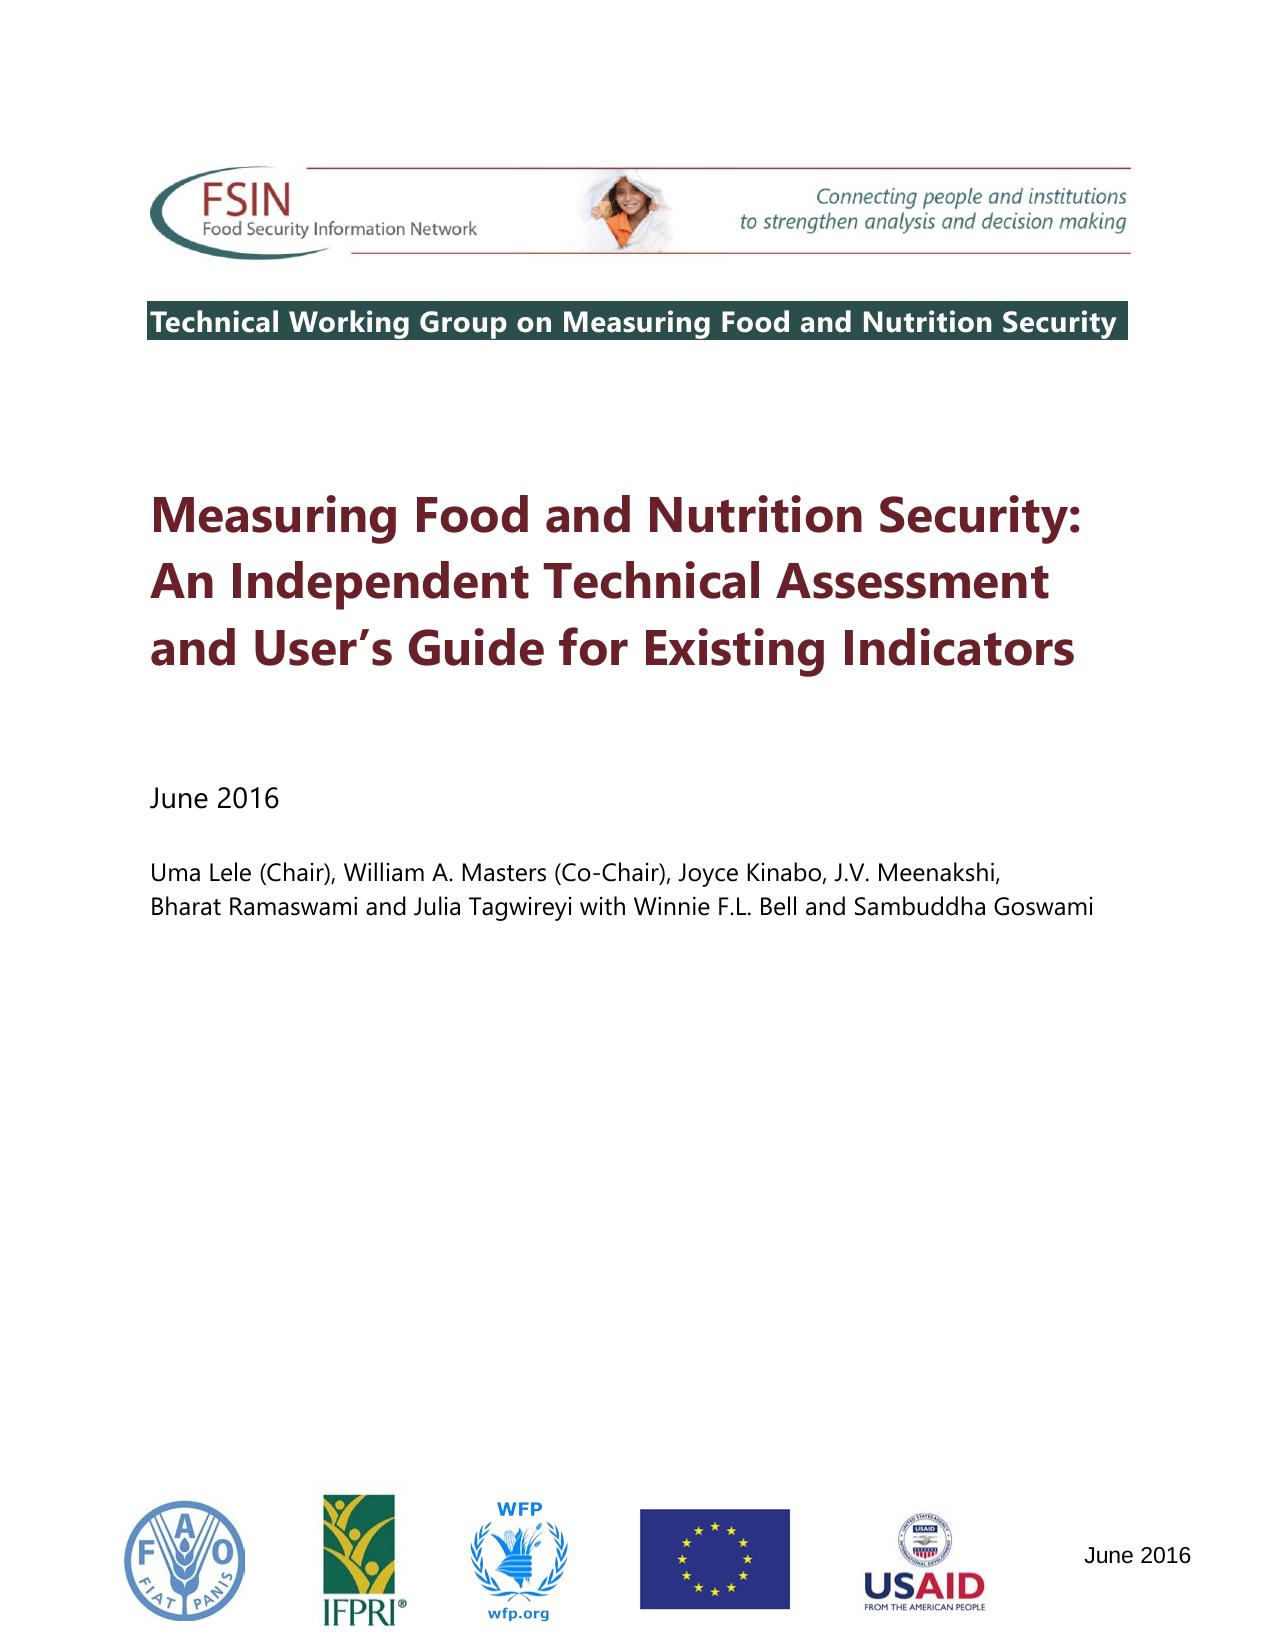 FSIN Food and Nutrition Security June2016